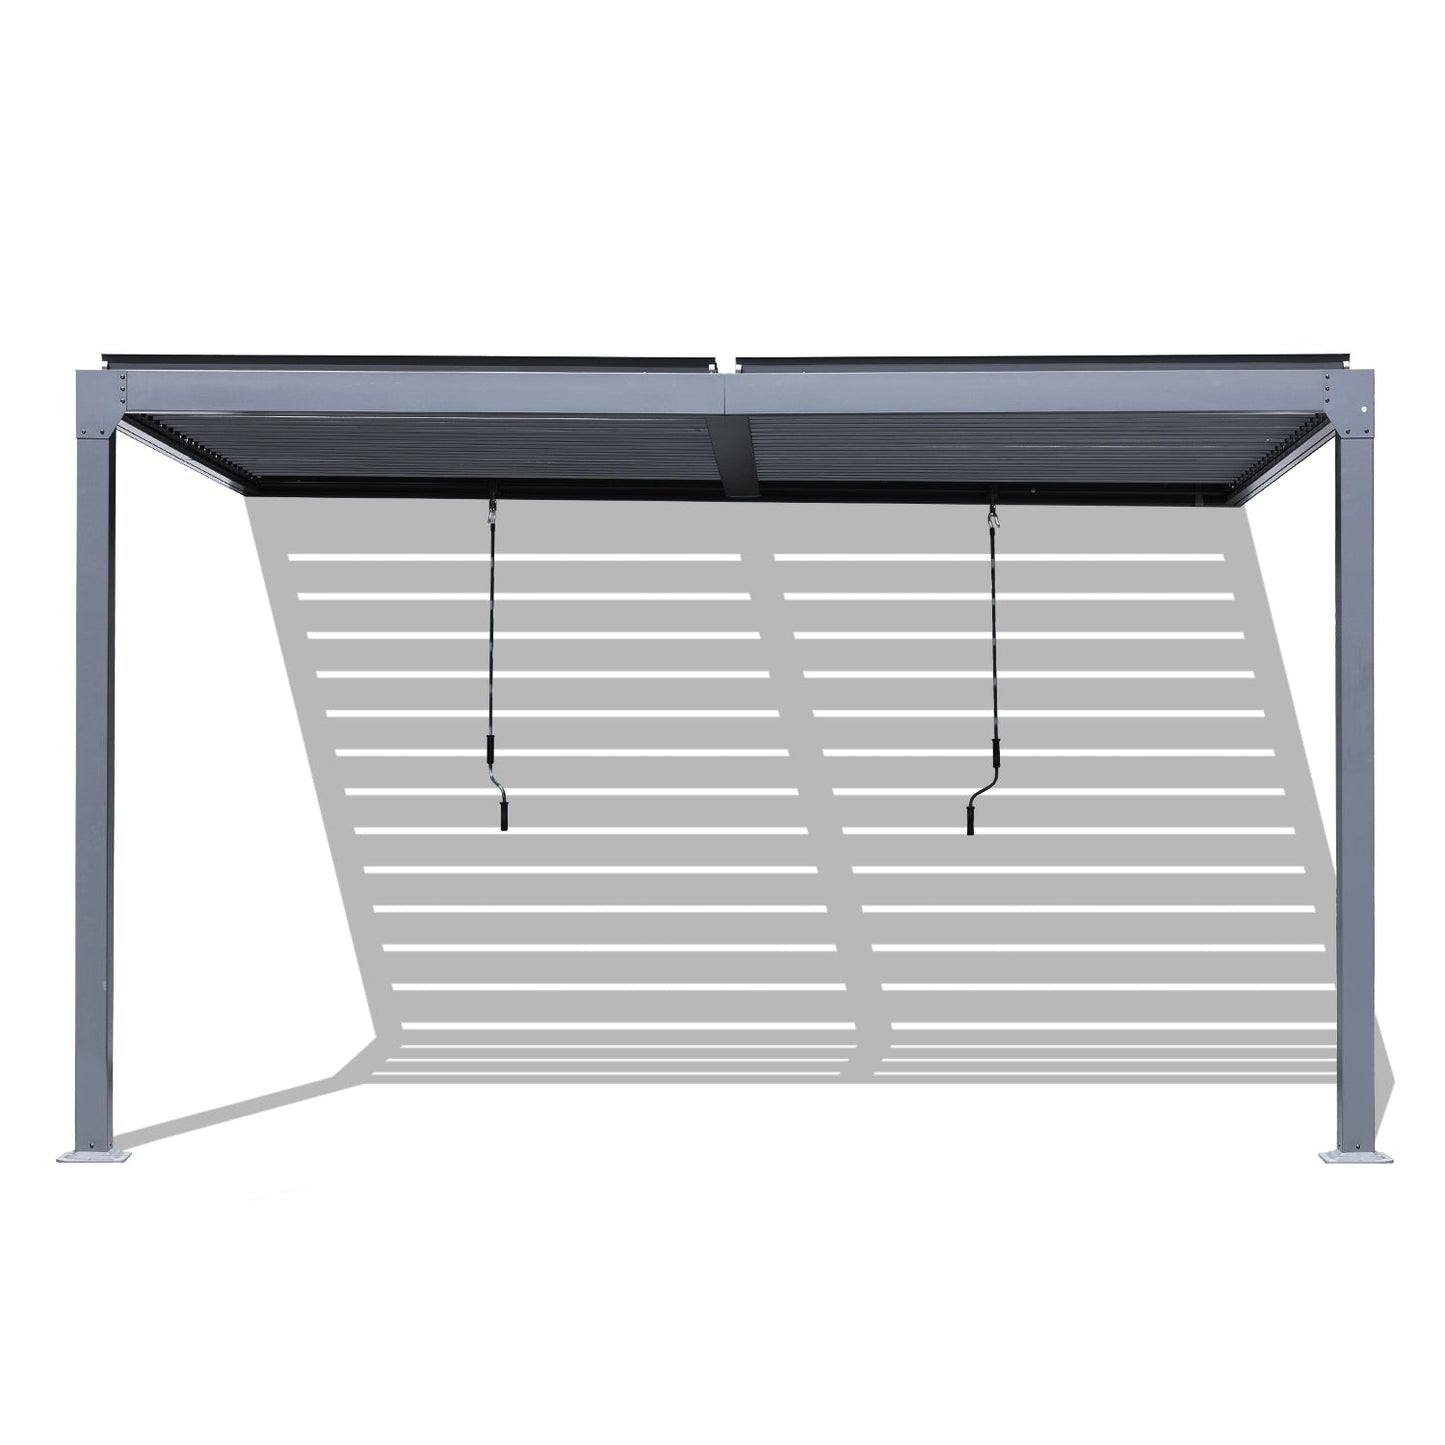 13 x 10 ft. Outdoor Aluminum Wall Mounted Louvered Pergola, Sun Shade Shelter with 2 Adjustable Panels  - Dark Gray/White Louvered Pergola Aoodor LLC Dark Gray  